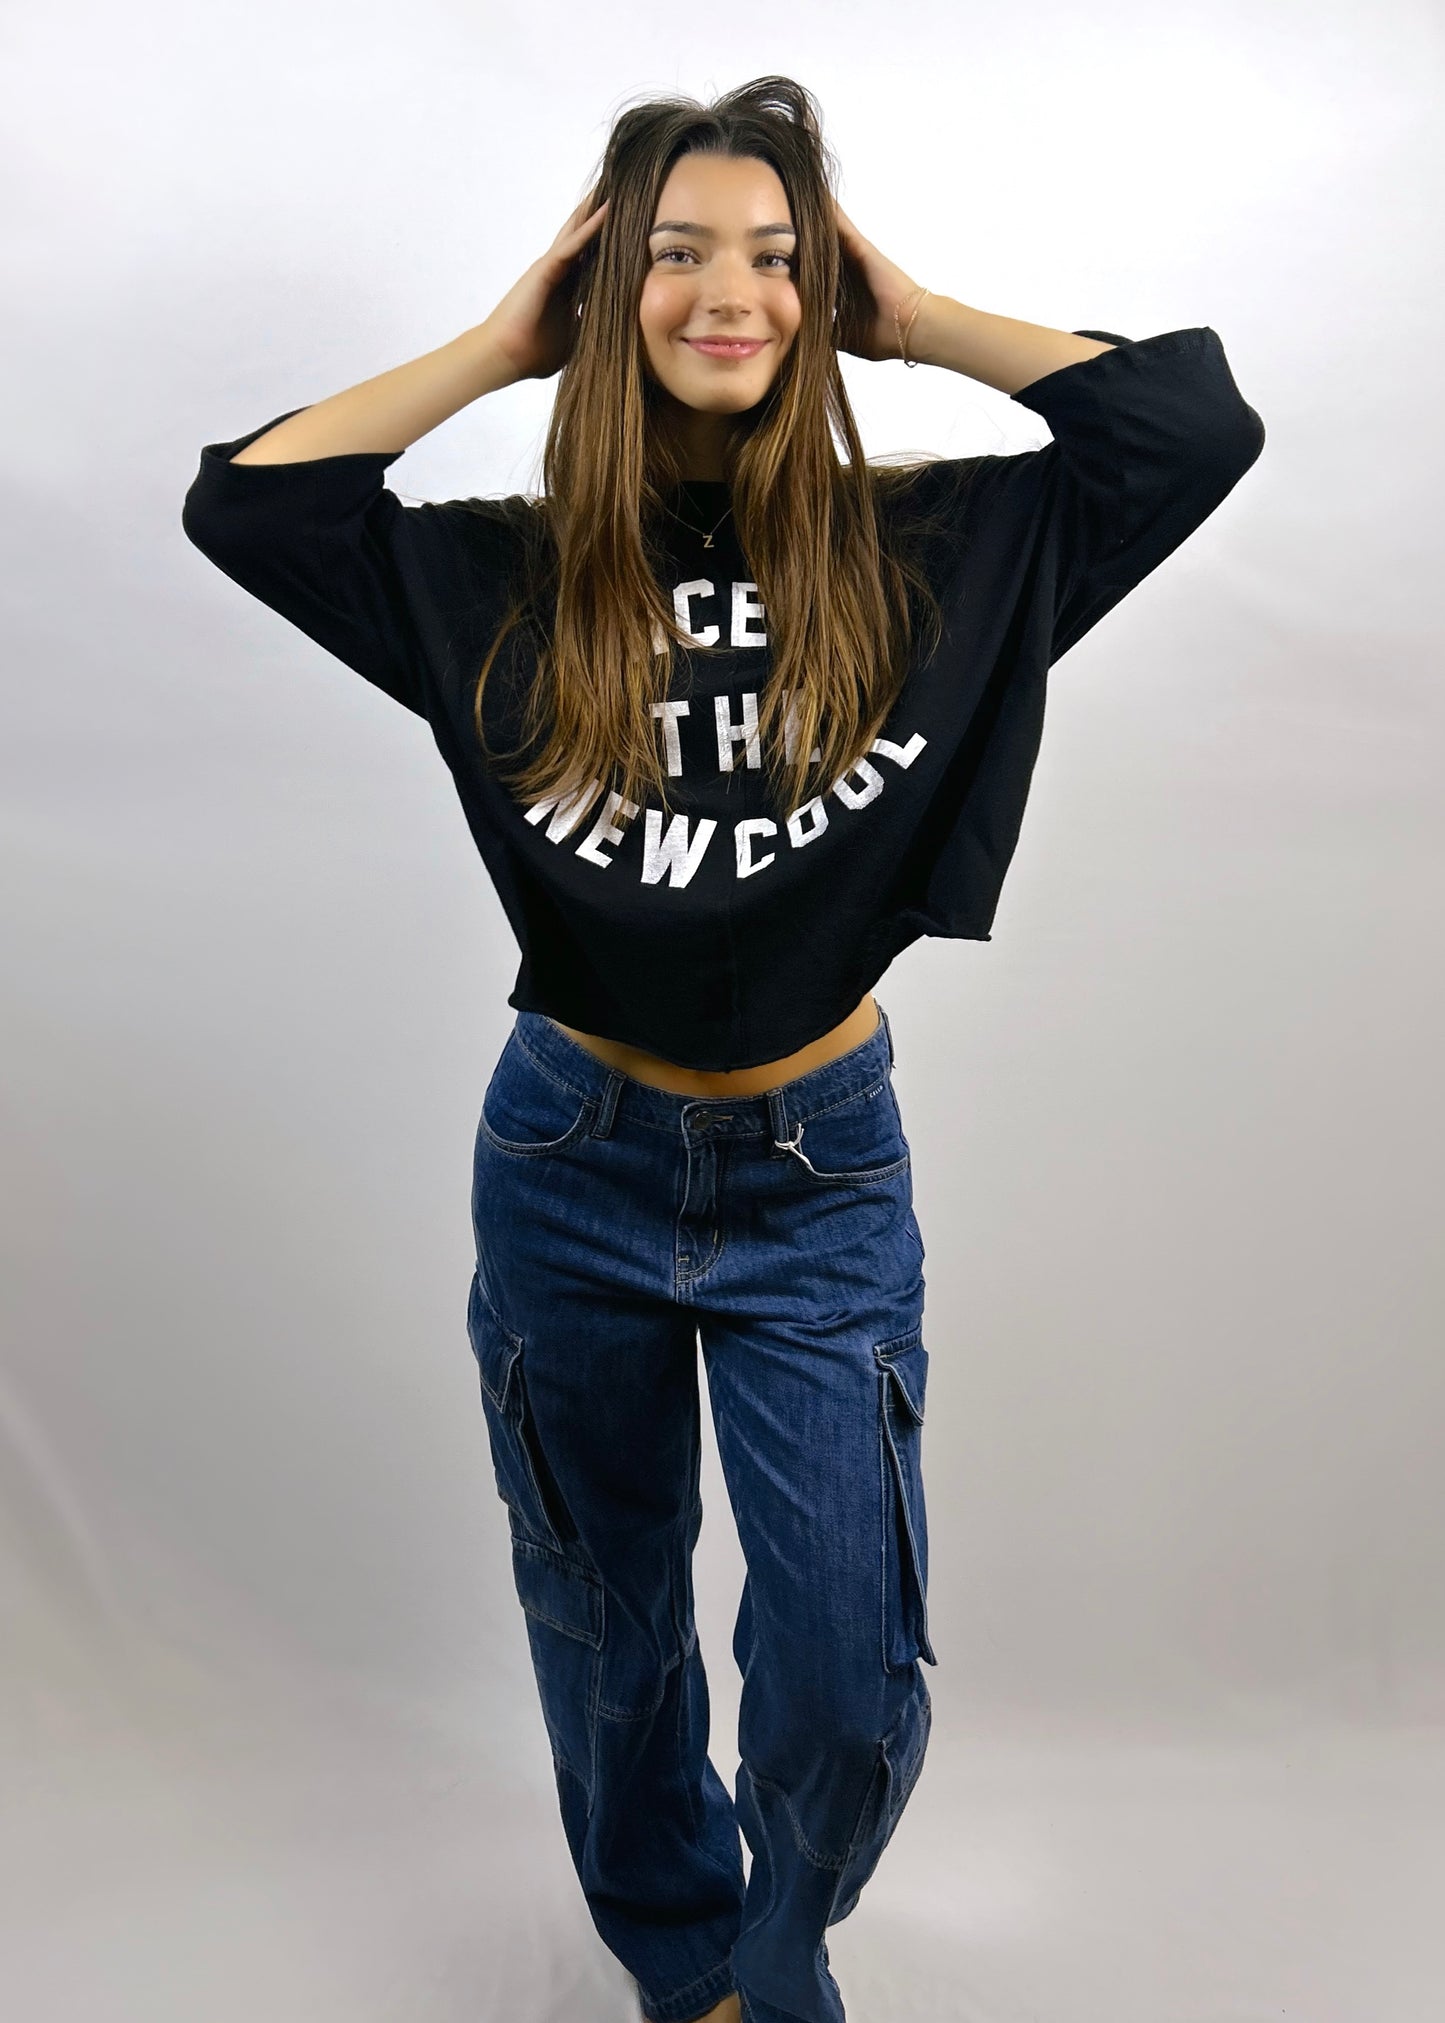 Oversized Nice is the New Cool Tee | Black & White - CC Boutique